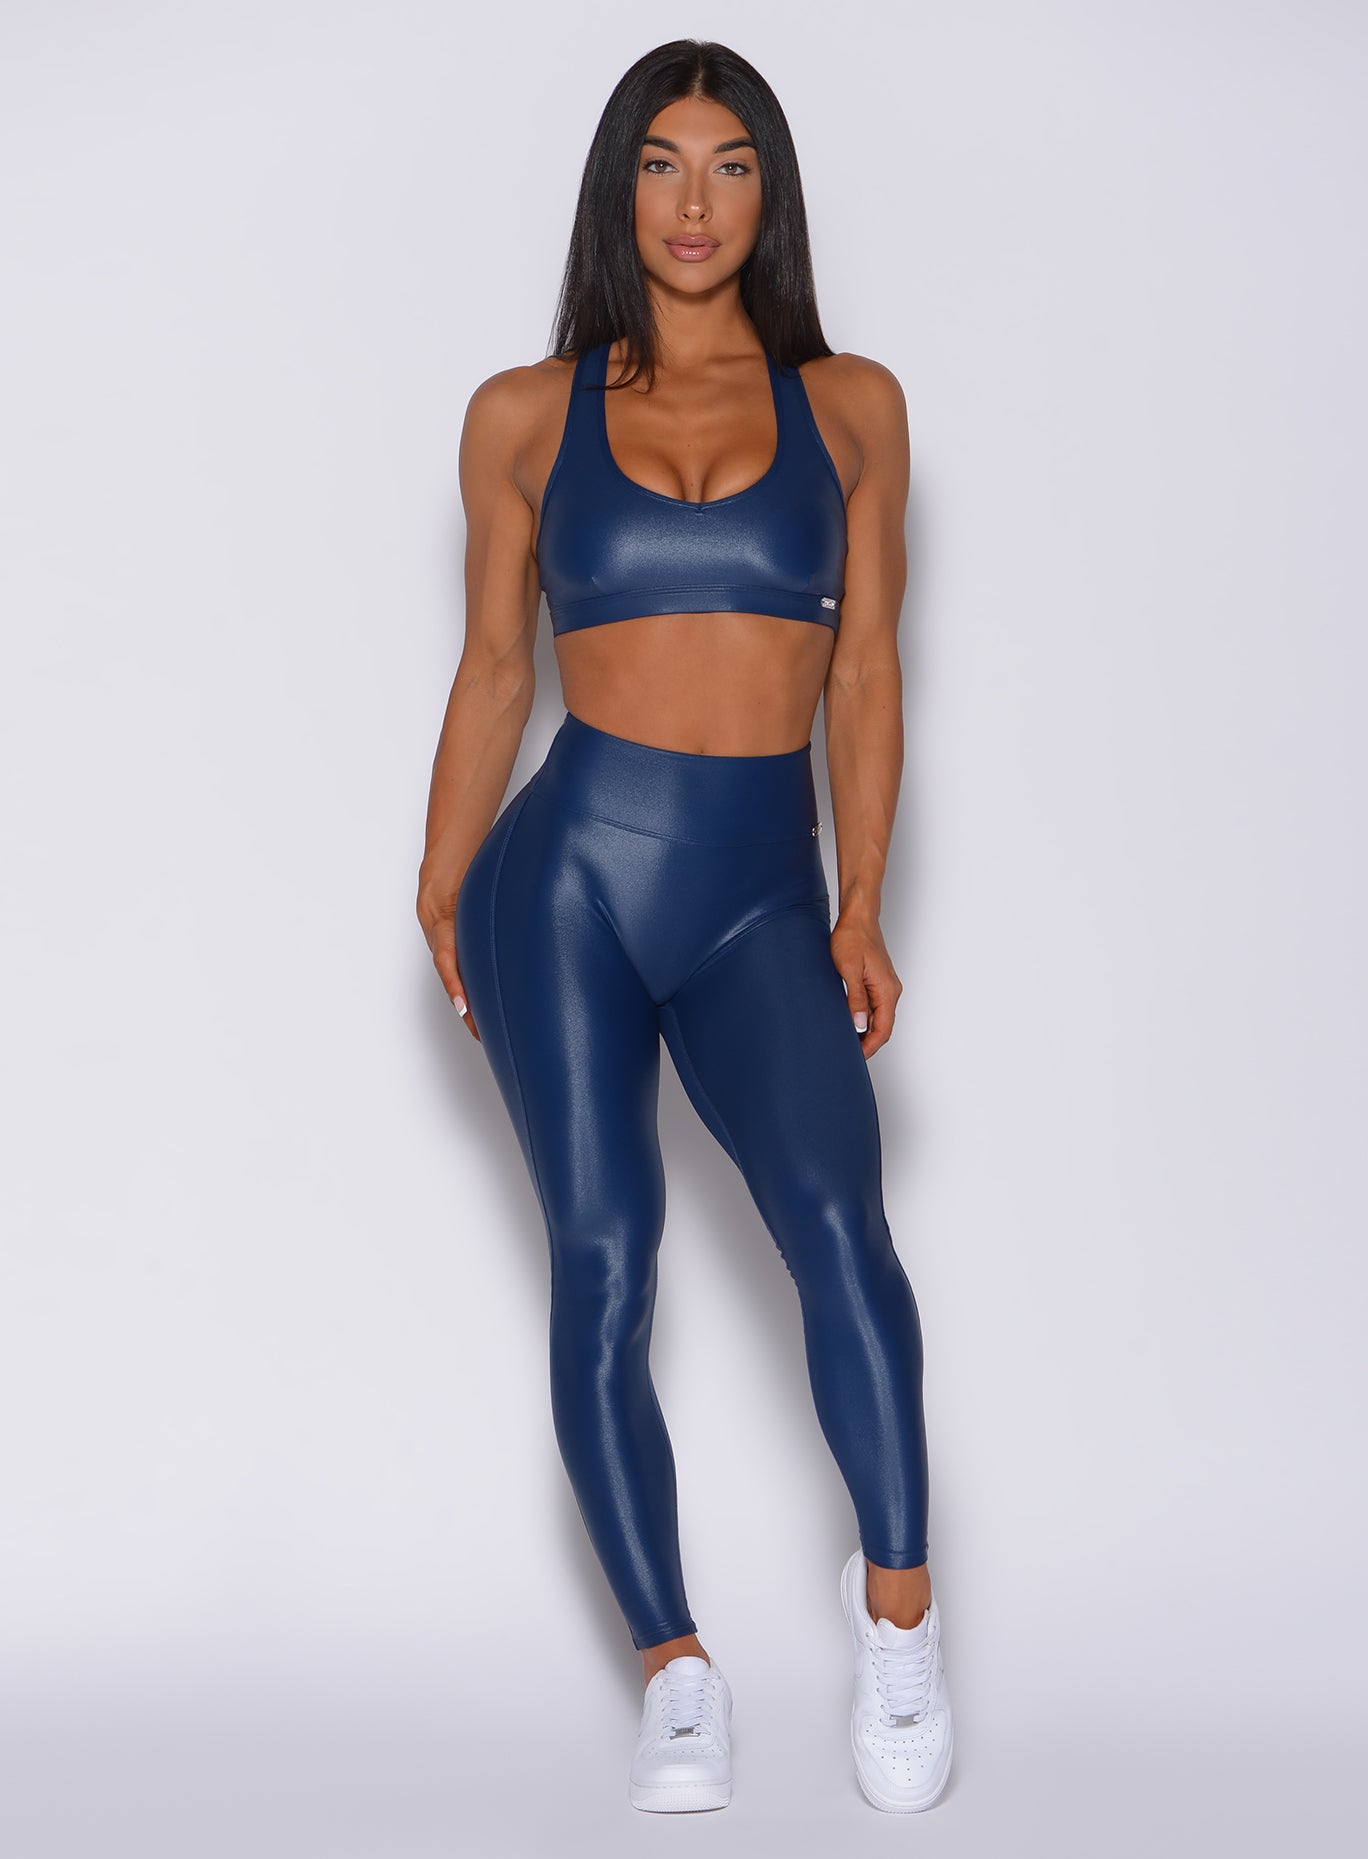 Model facing forward wearing our power gloss bra in navy blue color and a matching gloss leggings 